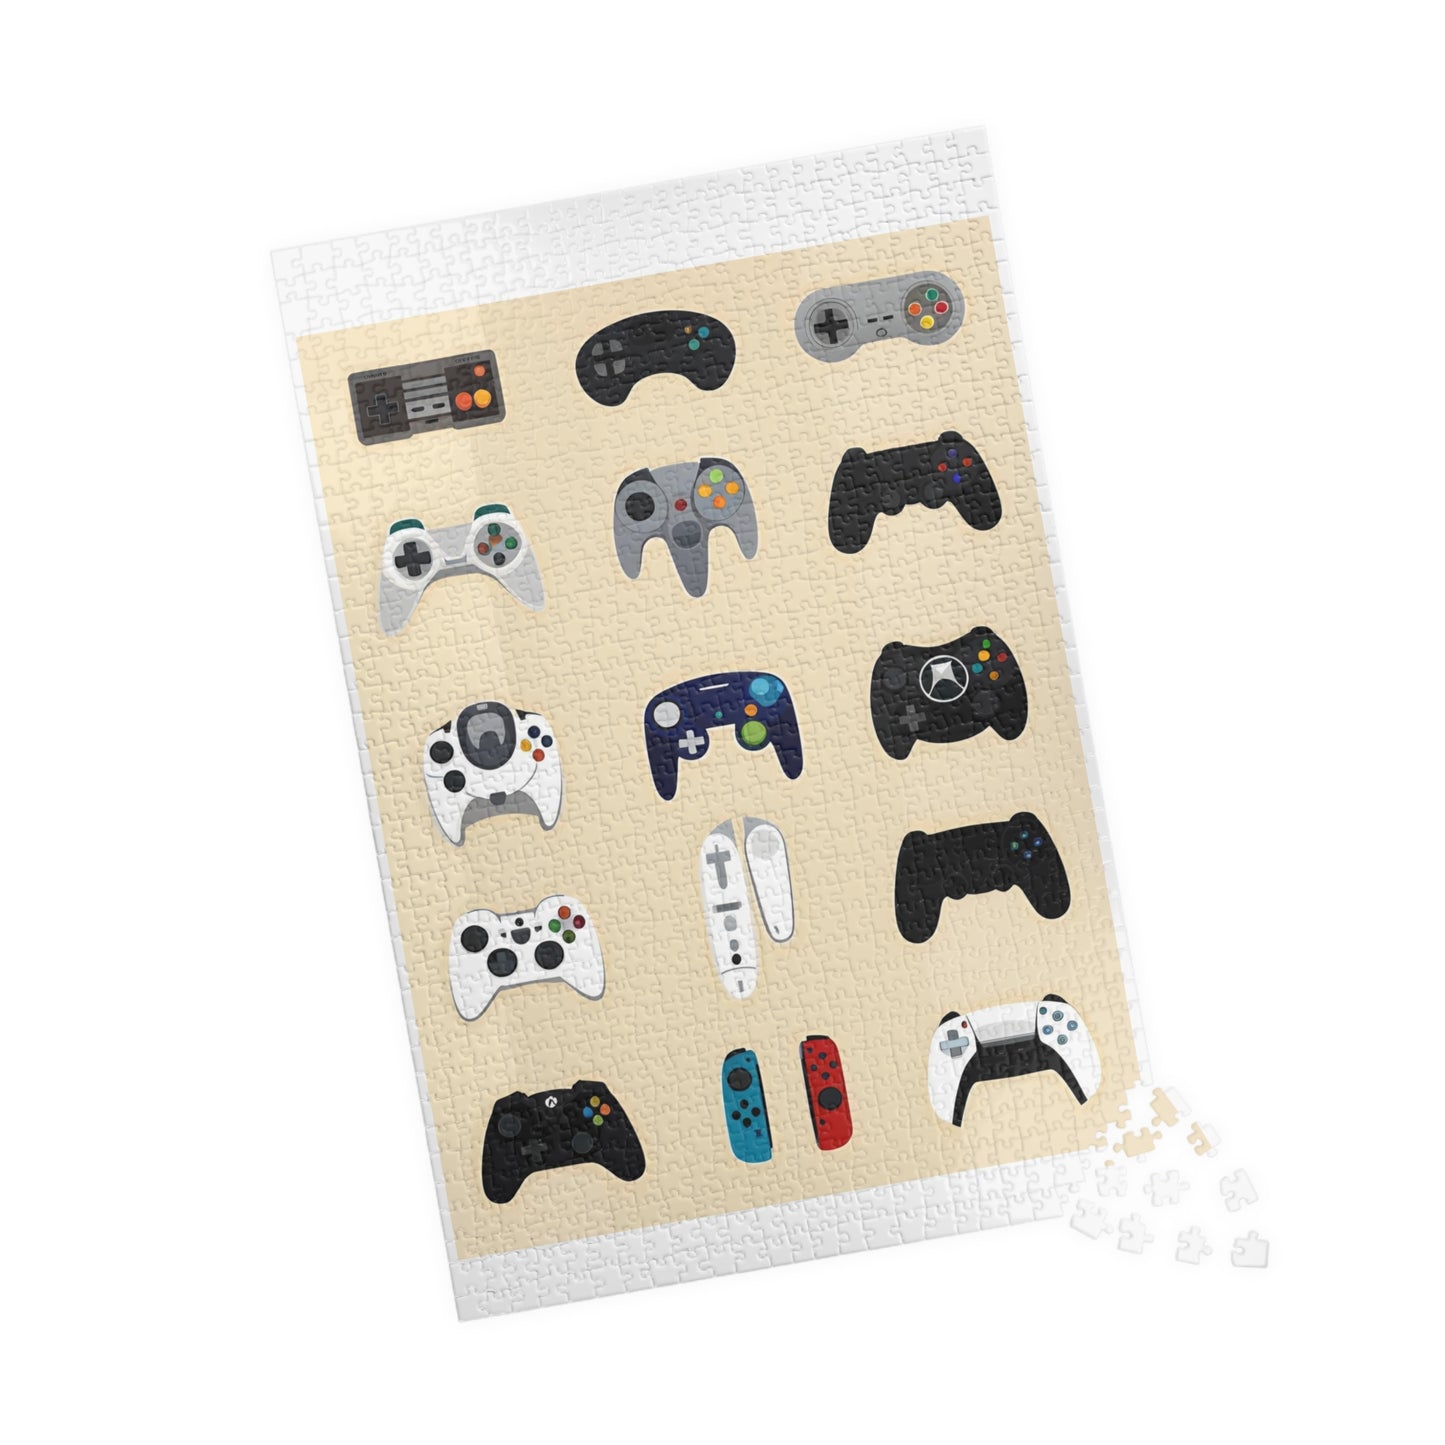 Gaming Controllers Puzzle (110, 252, 520, 1014-piece)